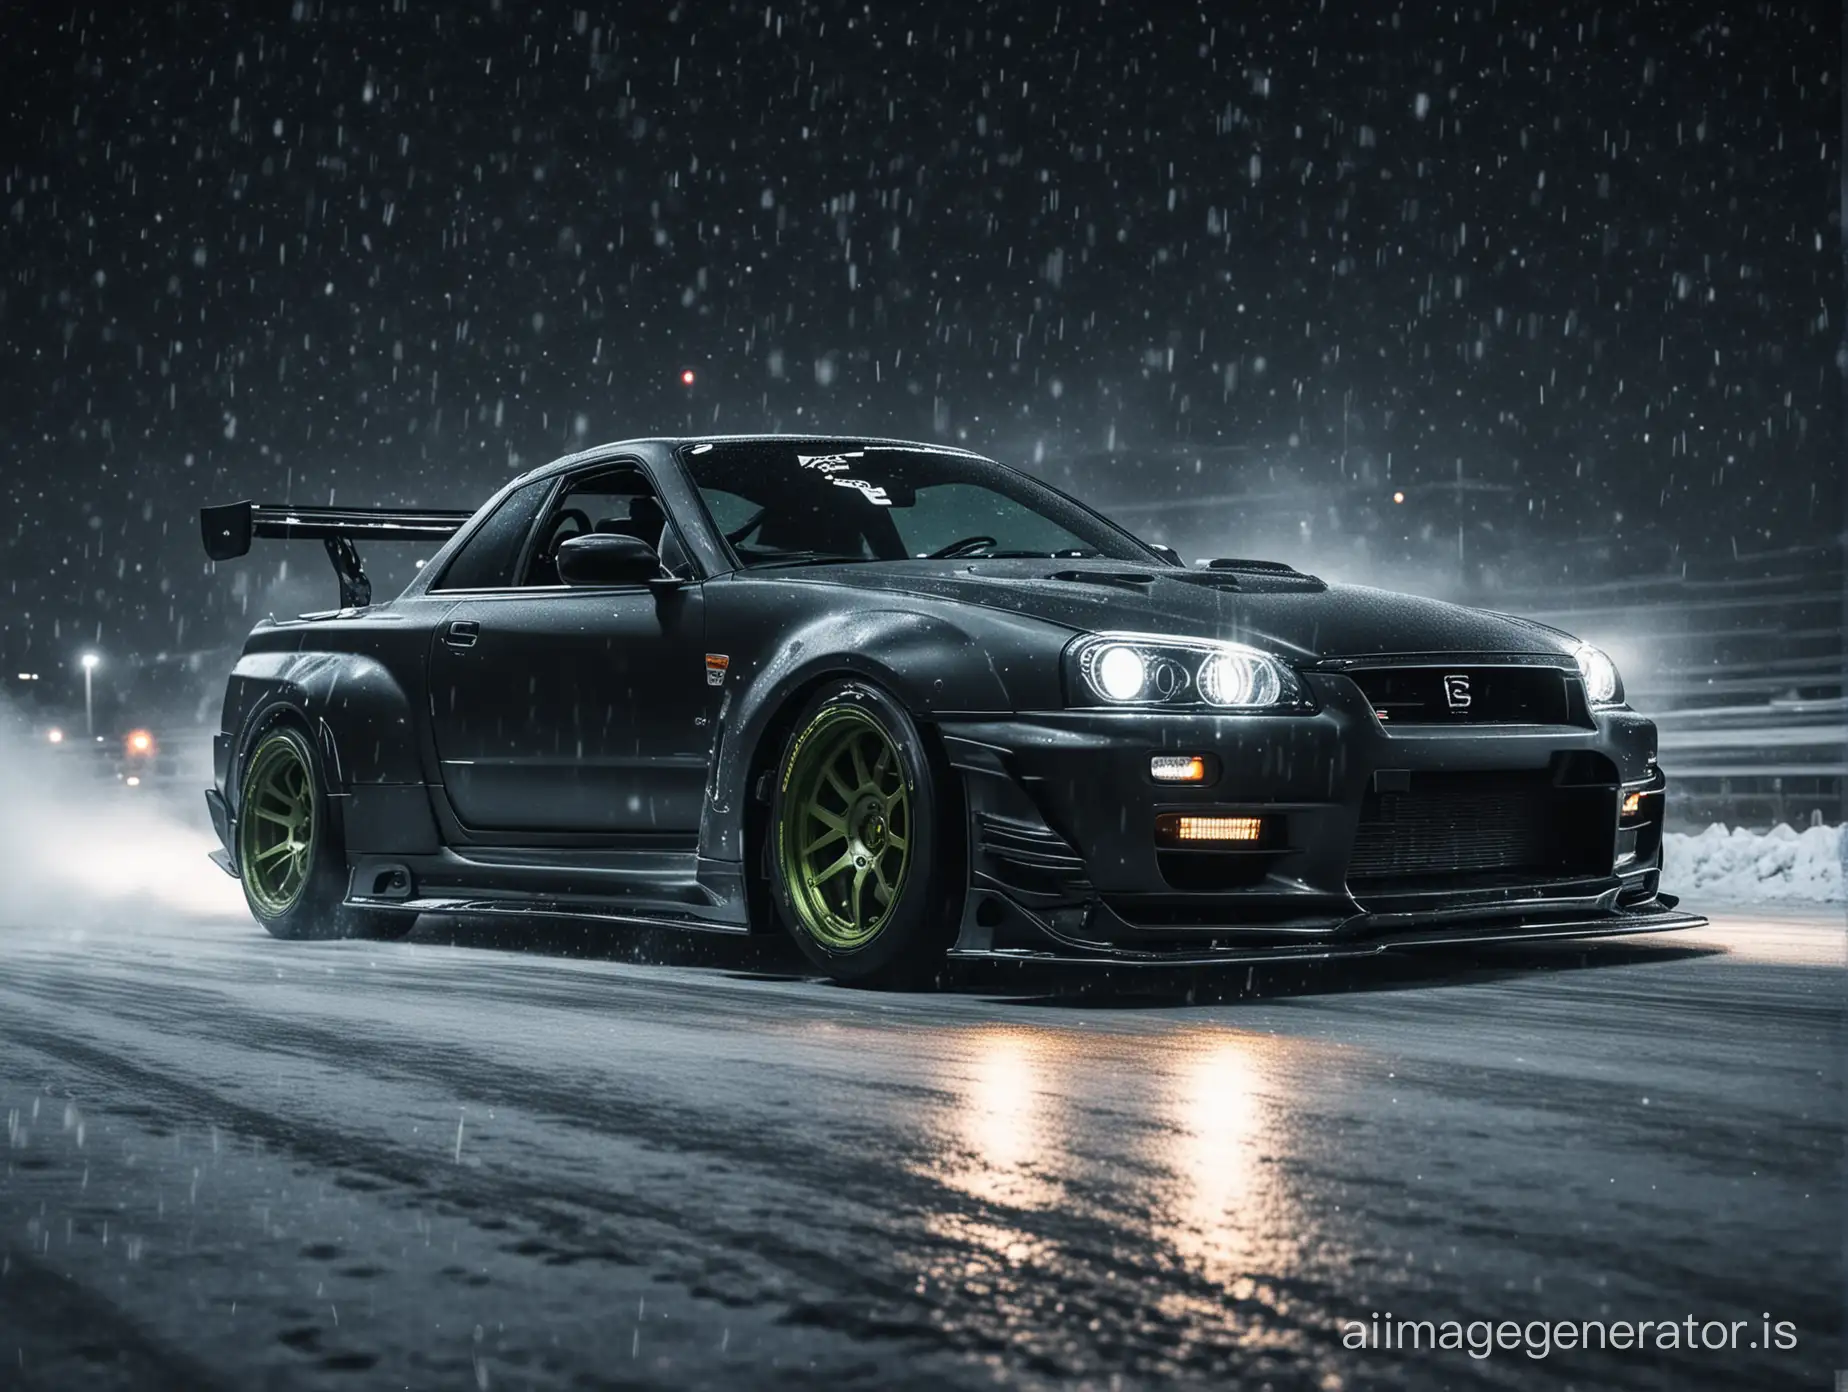 TUNED CAR from Nissan Skyline r34 koenigsegg jesko   DRIVING AT NIGHT DRIFTING DARK COLORS THE ROAD BLACK CARBON THE CAR COLOR darker make to  snow